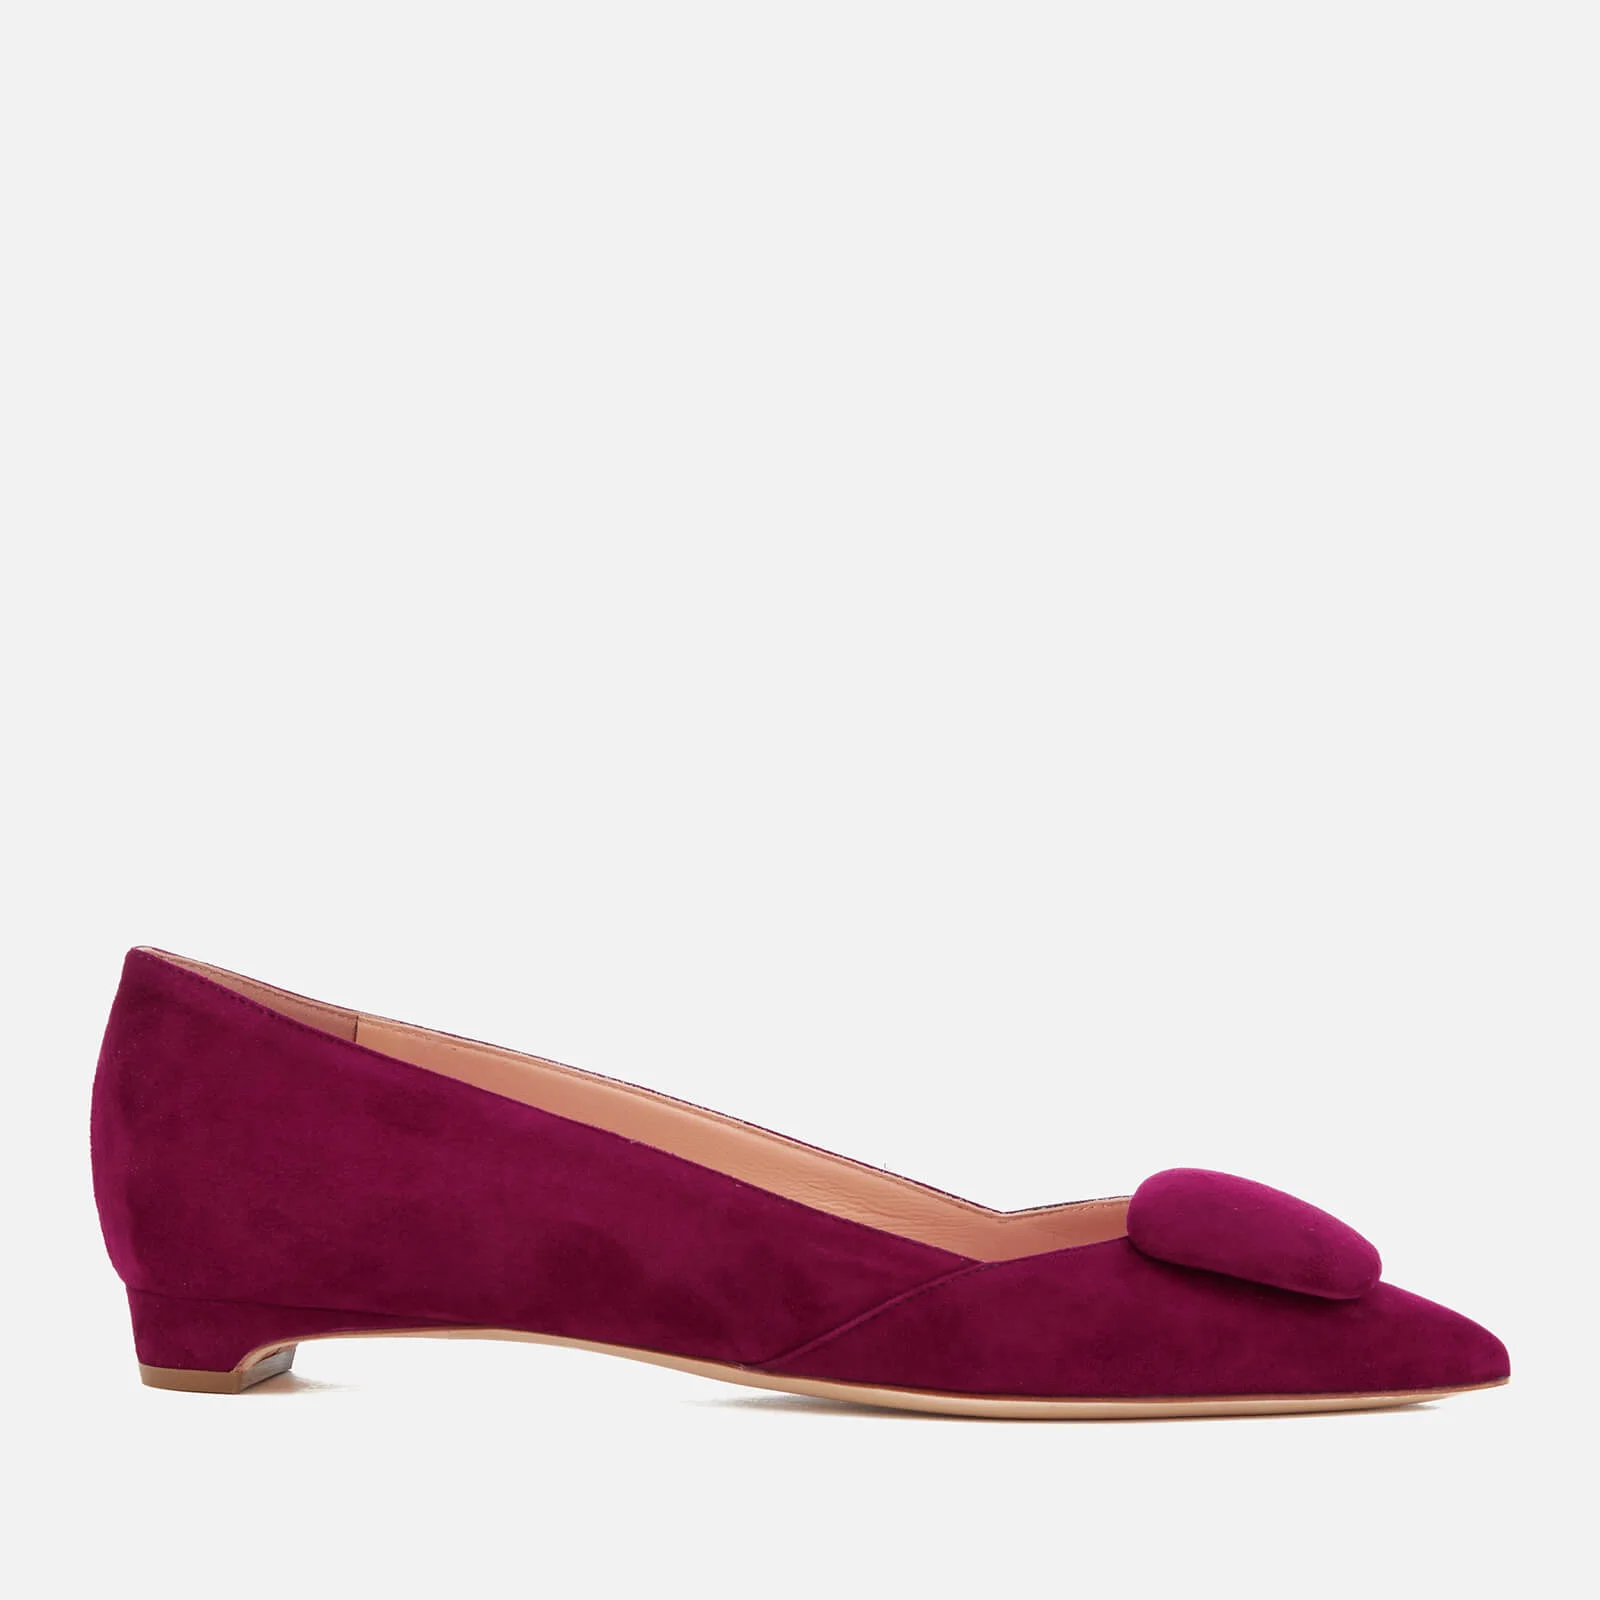 Rupert Sanderson Women's Aga Suede Pointed Flat Shoes - Sangria Image 1